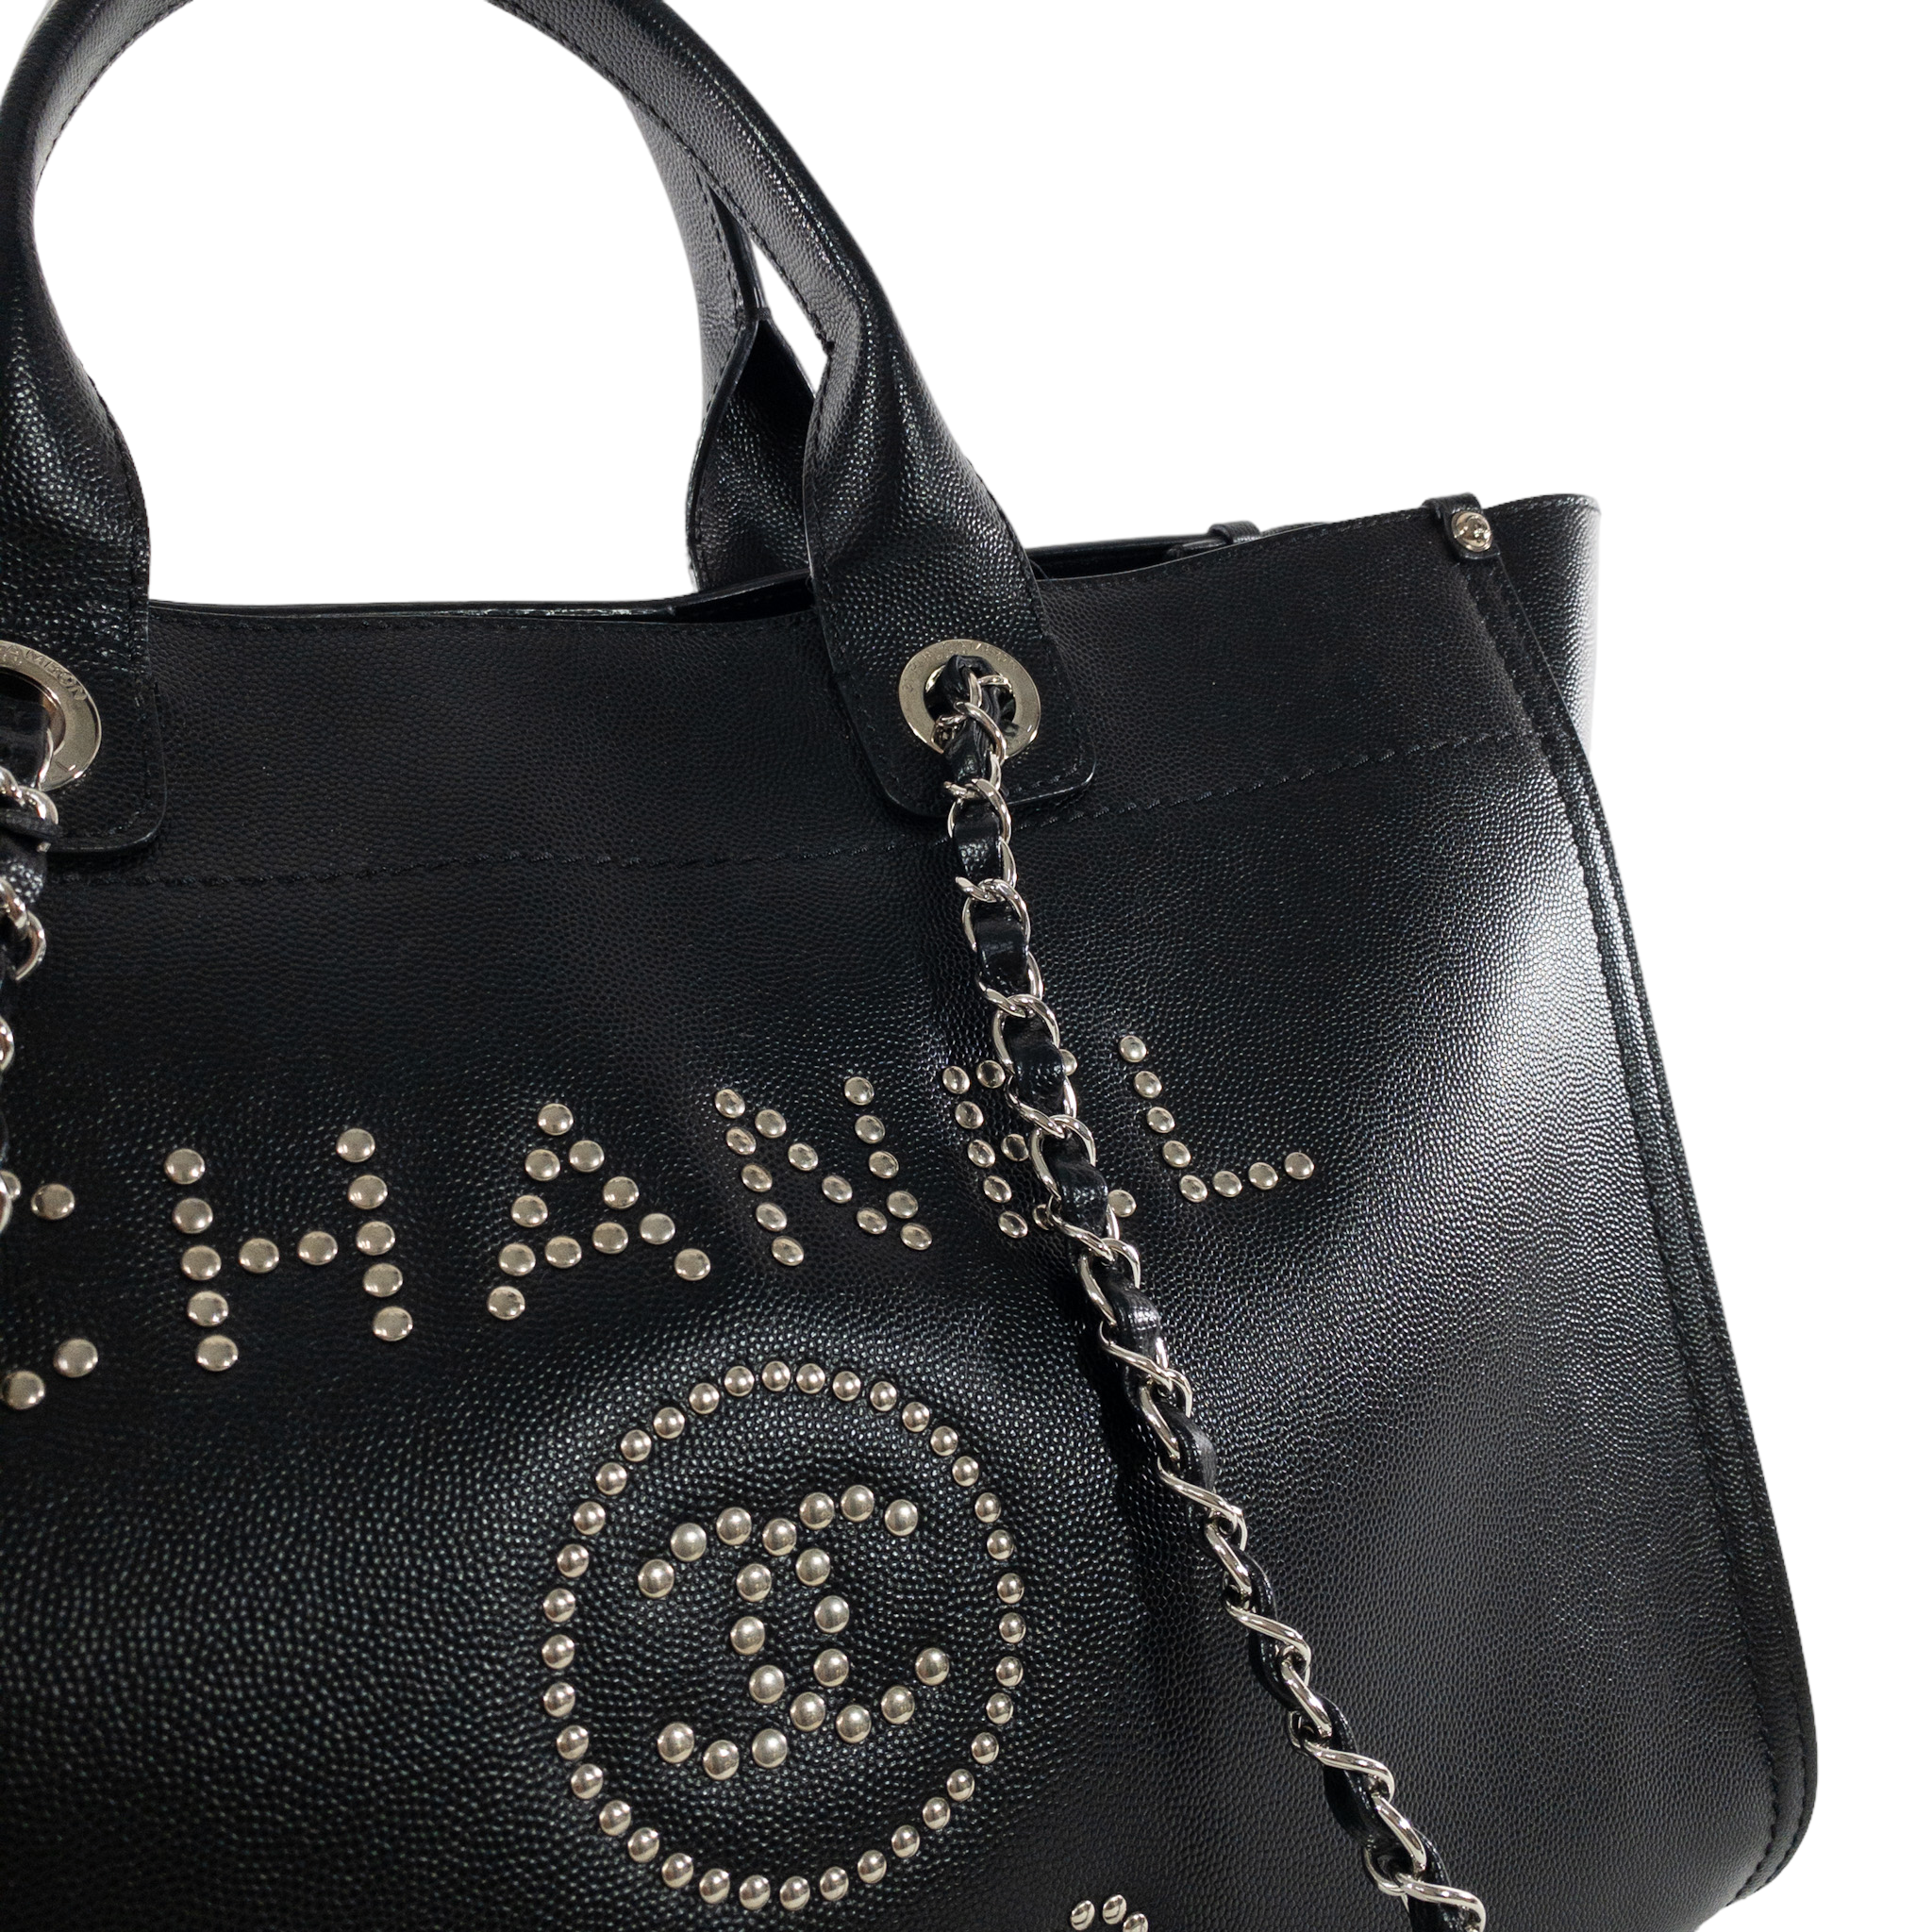 CHANEL, Bags, Chanel Caviar Leather Studded Deauville Tote